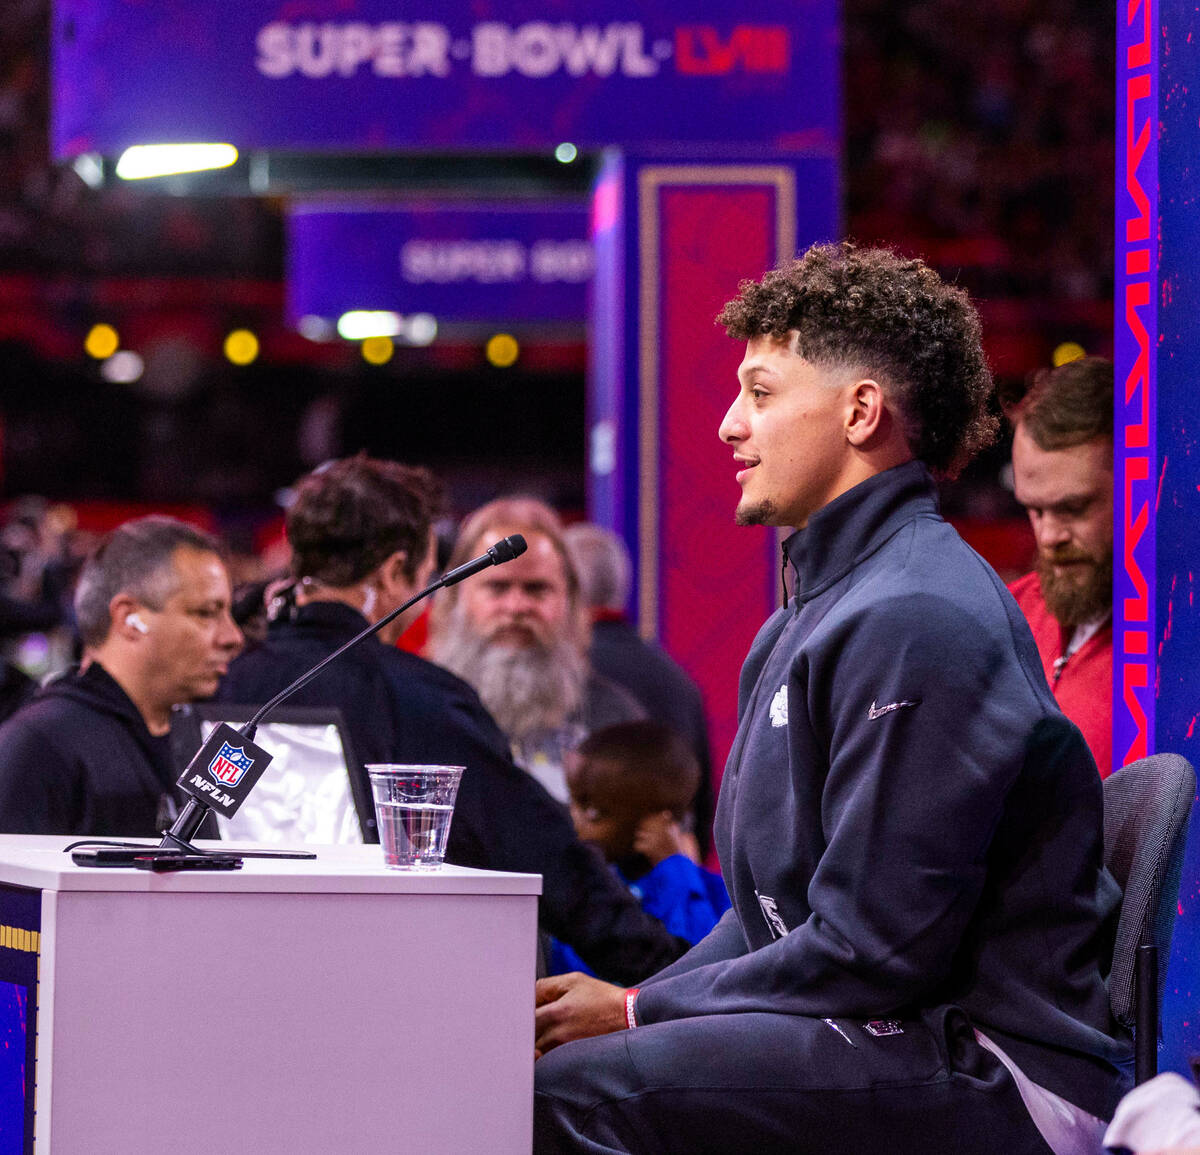 Kansas City Chiefs player Patrick Mahomes listens to a media member's question on the field dur ...